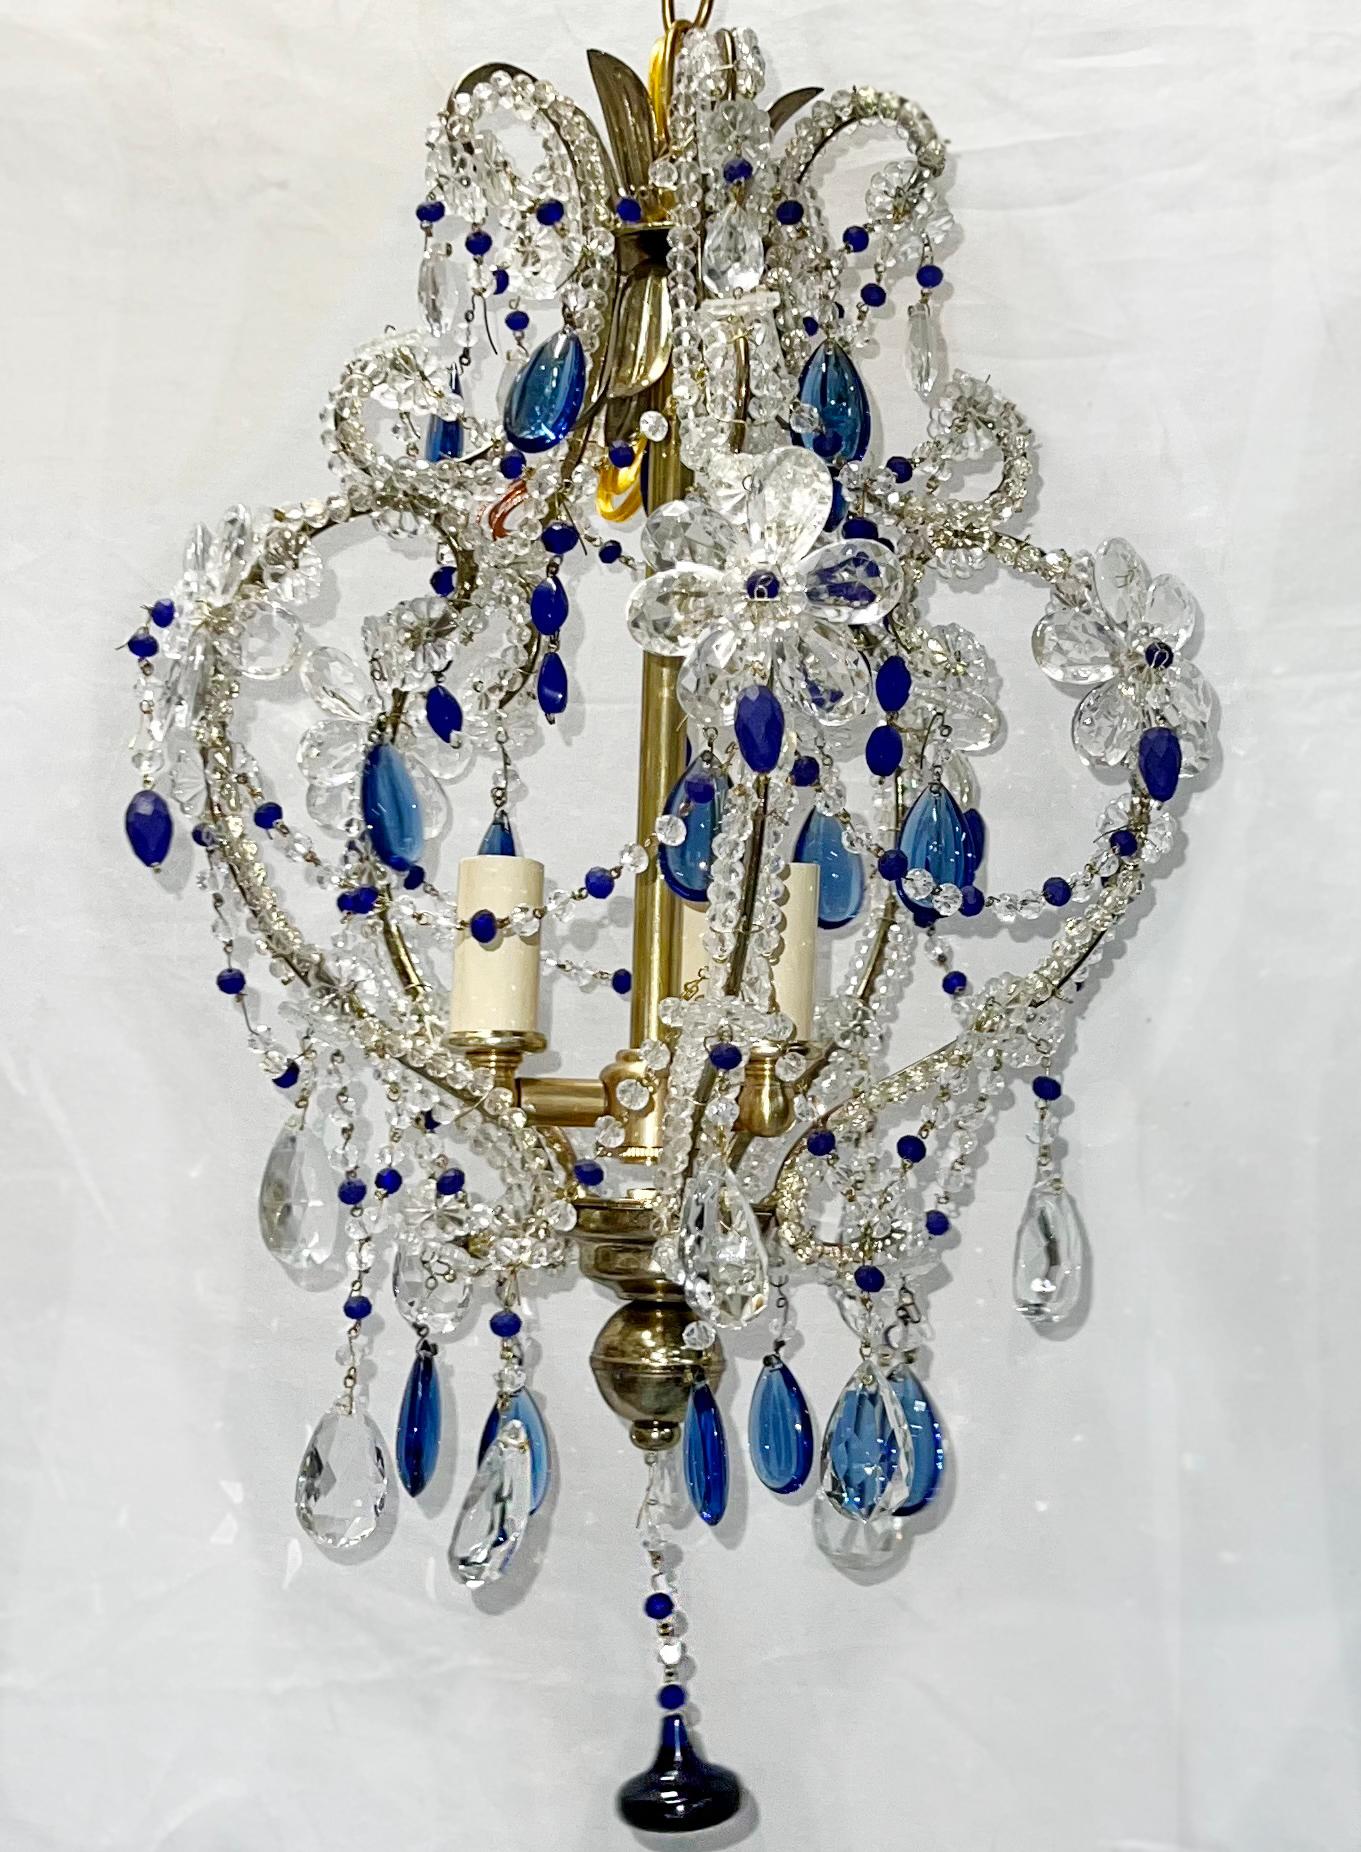 A circa 1920's French chandelier with blue pendants with 3 candelabra lights.

Measurements:
Drop: 23